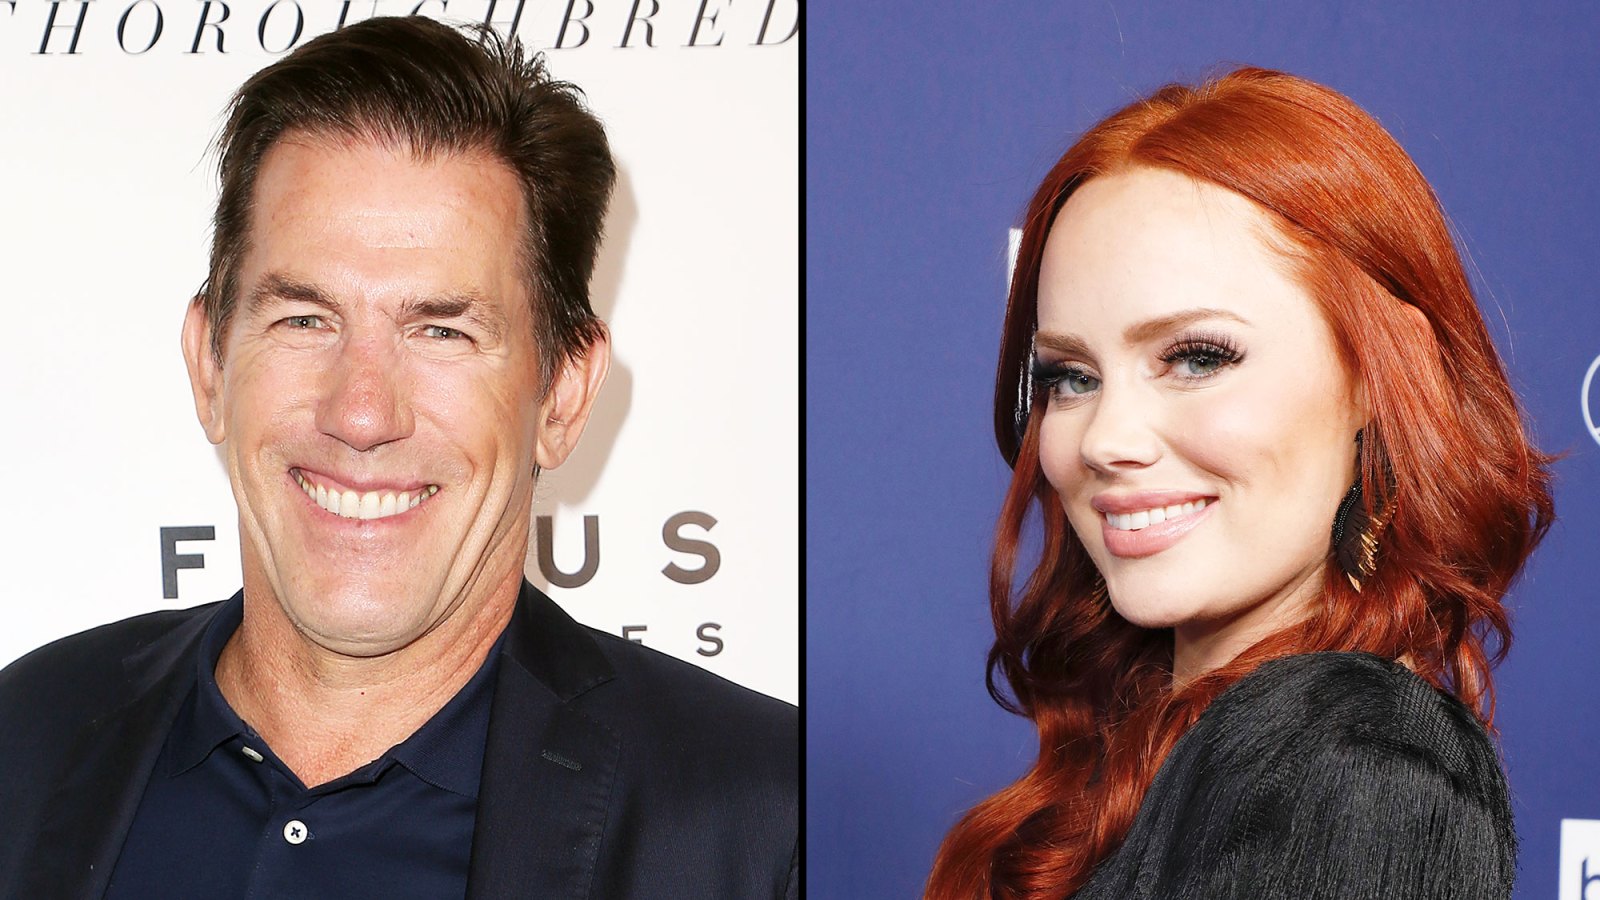 Southern Charms Thomas Ravenel and Kathryn Dennis After Nasty Legal Battle